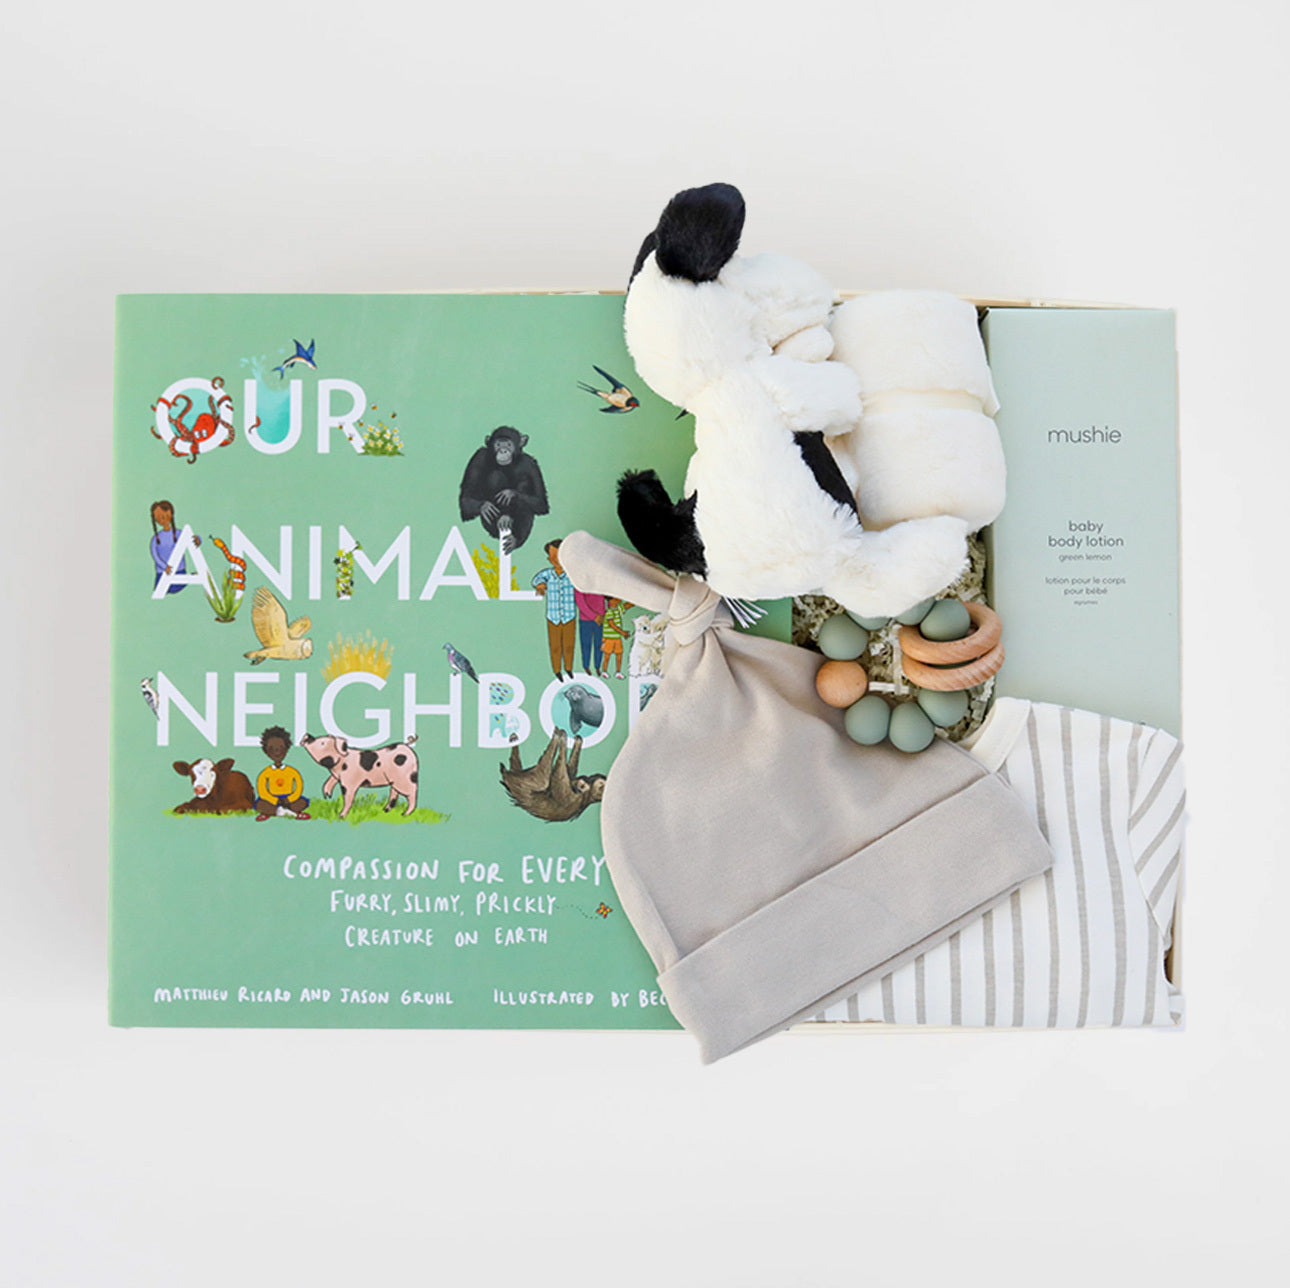 BOXFOX Original creme New Family Gift Box packed with PEHR cozy grey striped onesie 3-6 months, Jellycat puppy lovey, Our Animal Neighbors book, Pipette baby oil, Alva sage green teether, and Alva grey beanie